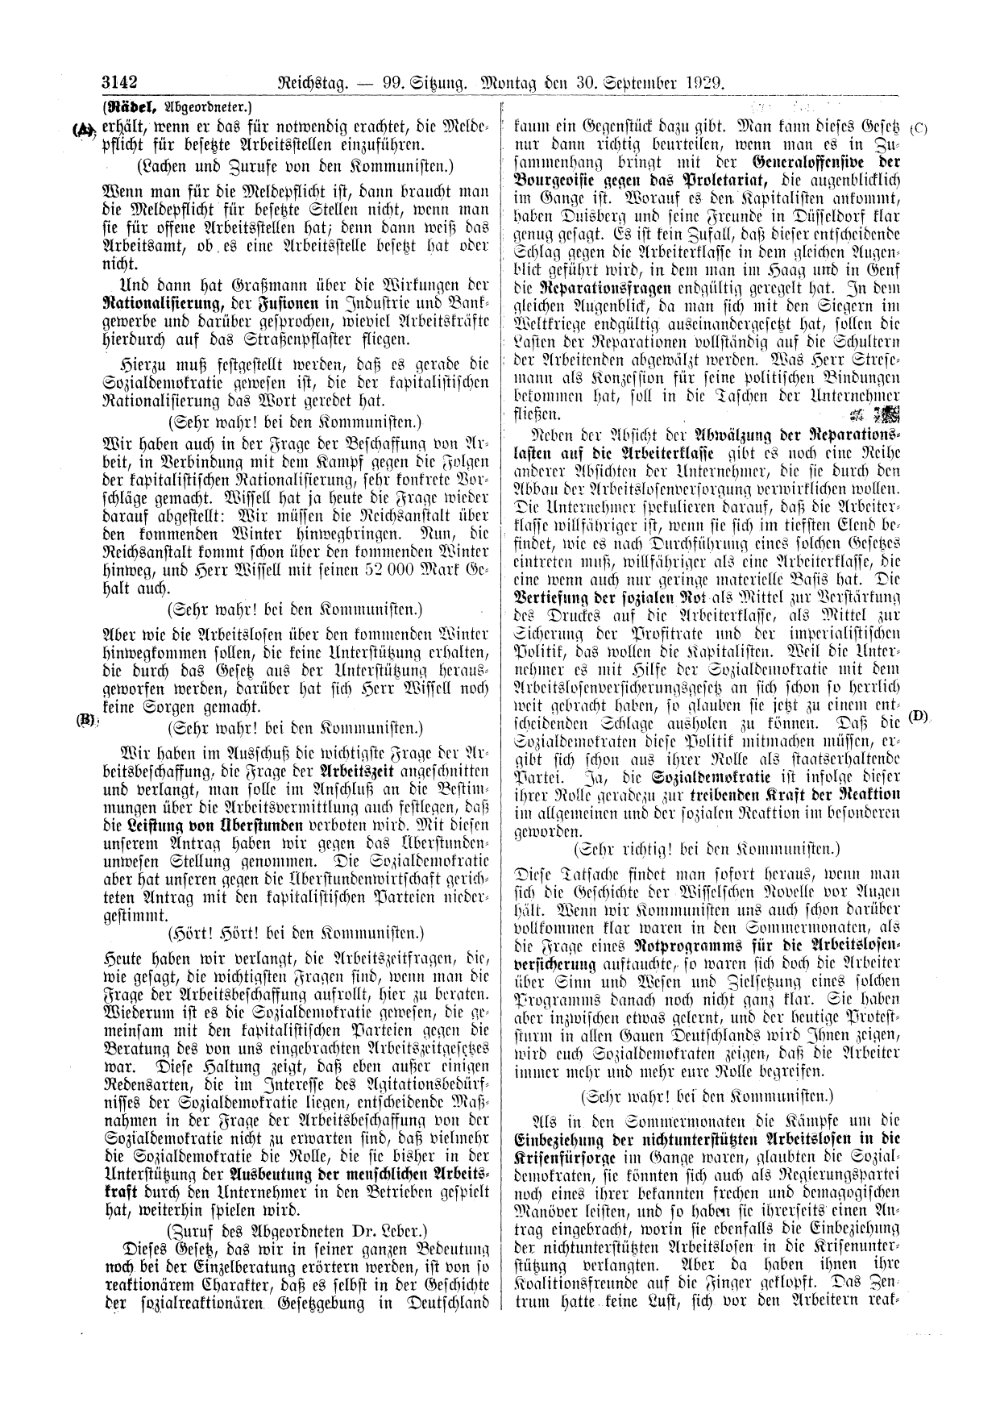 Scan of page 3142